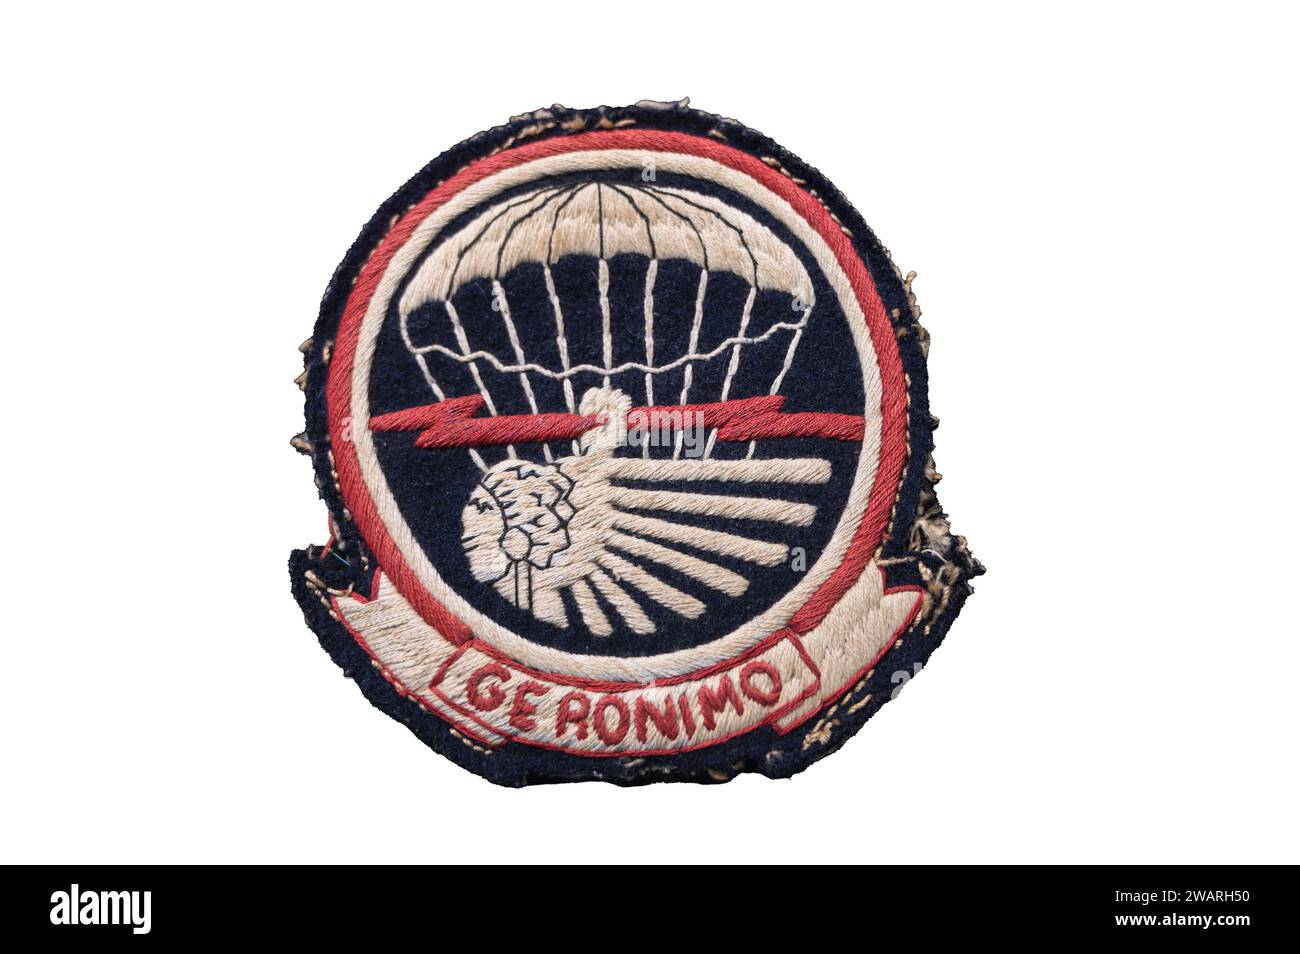 US WWII 501st Parachute Infantry Regiment Shoulder Patch - Geronimo on White Background Stock Photo